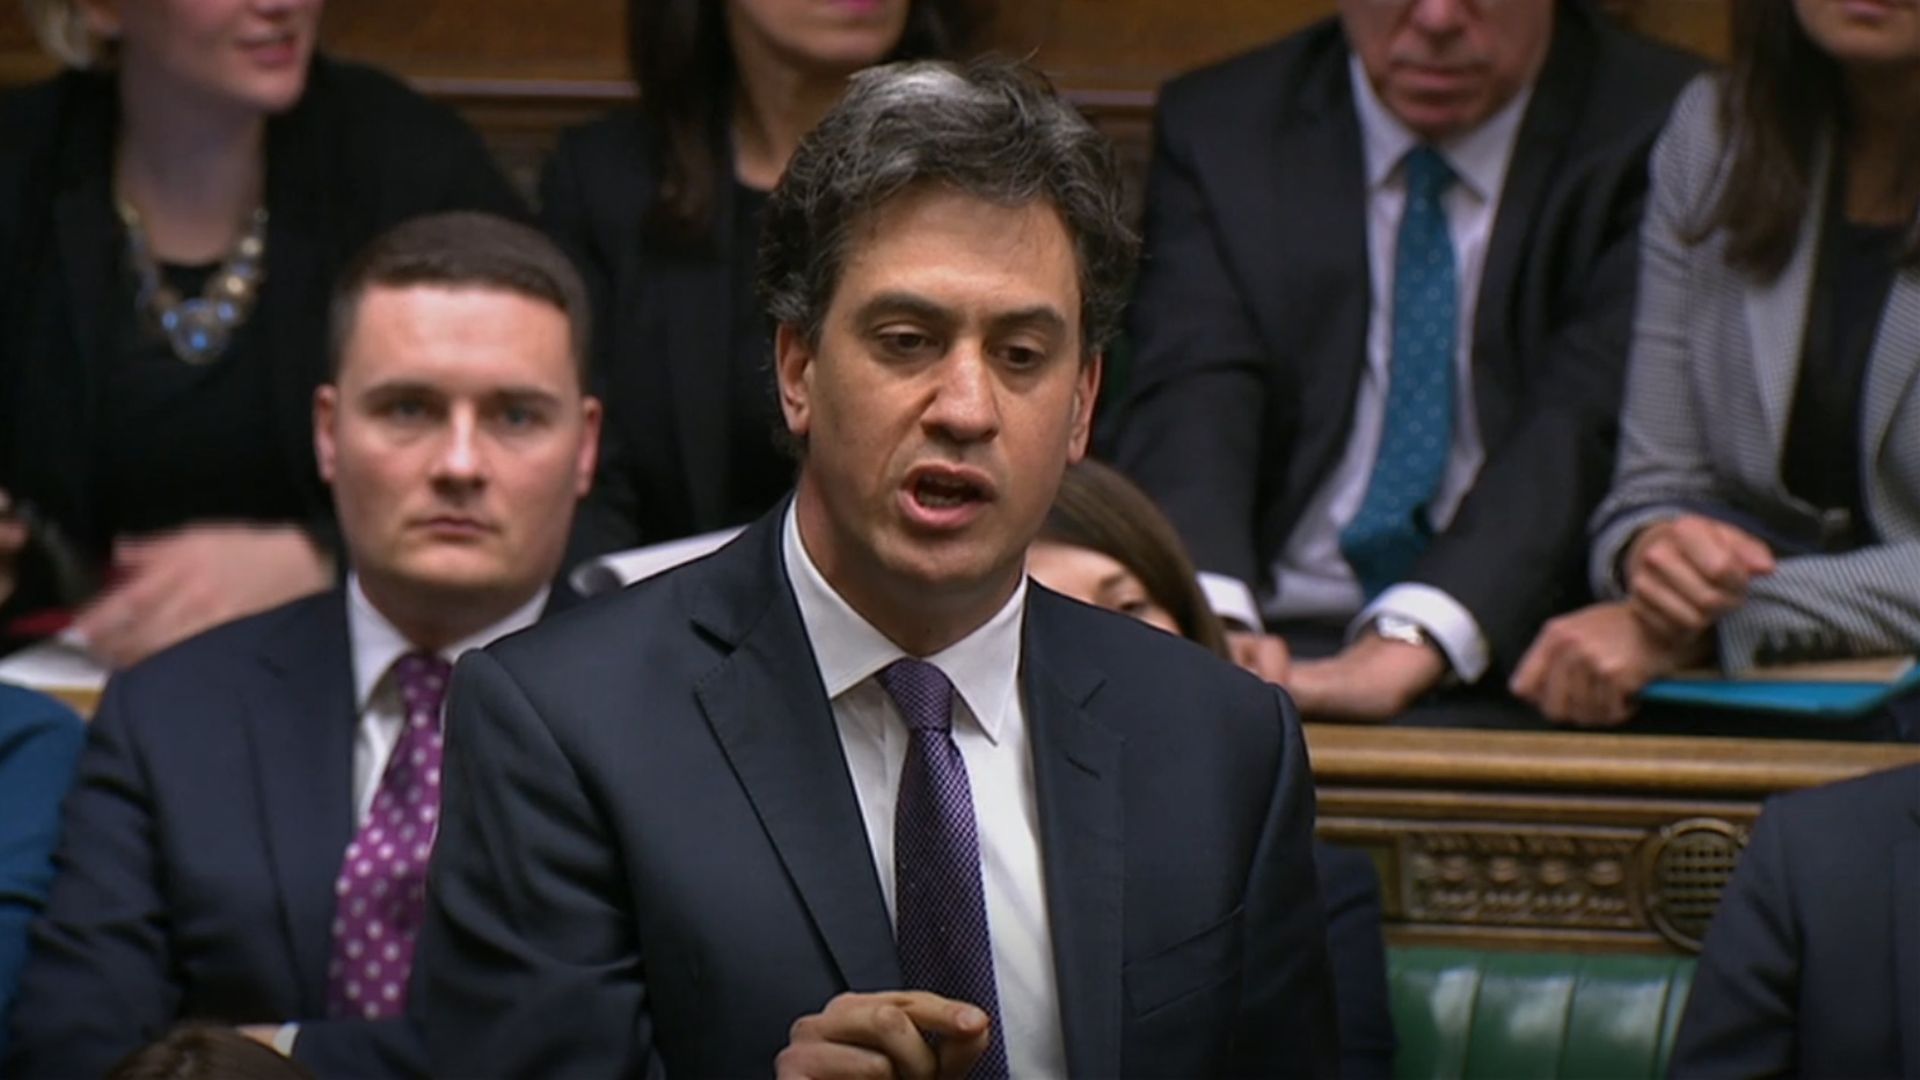 Shadow business secretary Ed Miliband in the House of Commons - Credit: PA